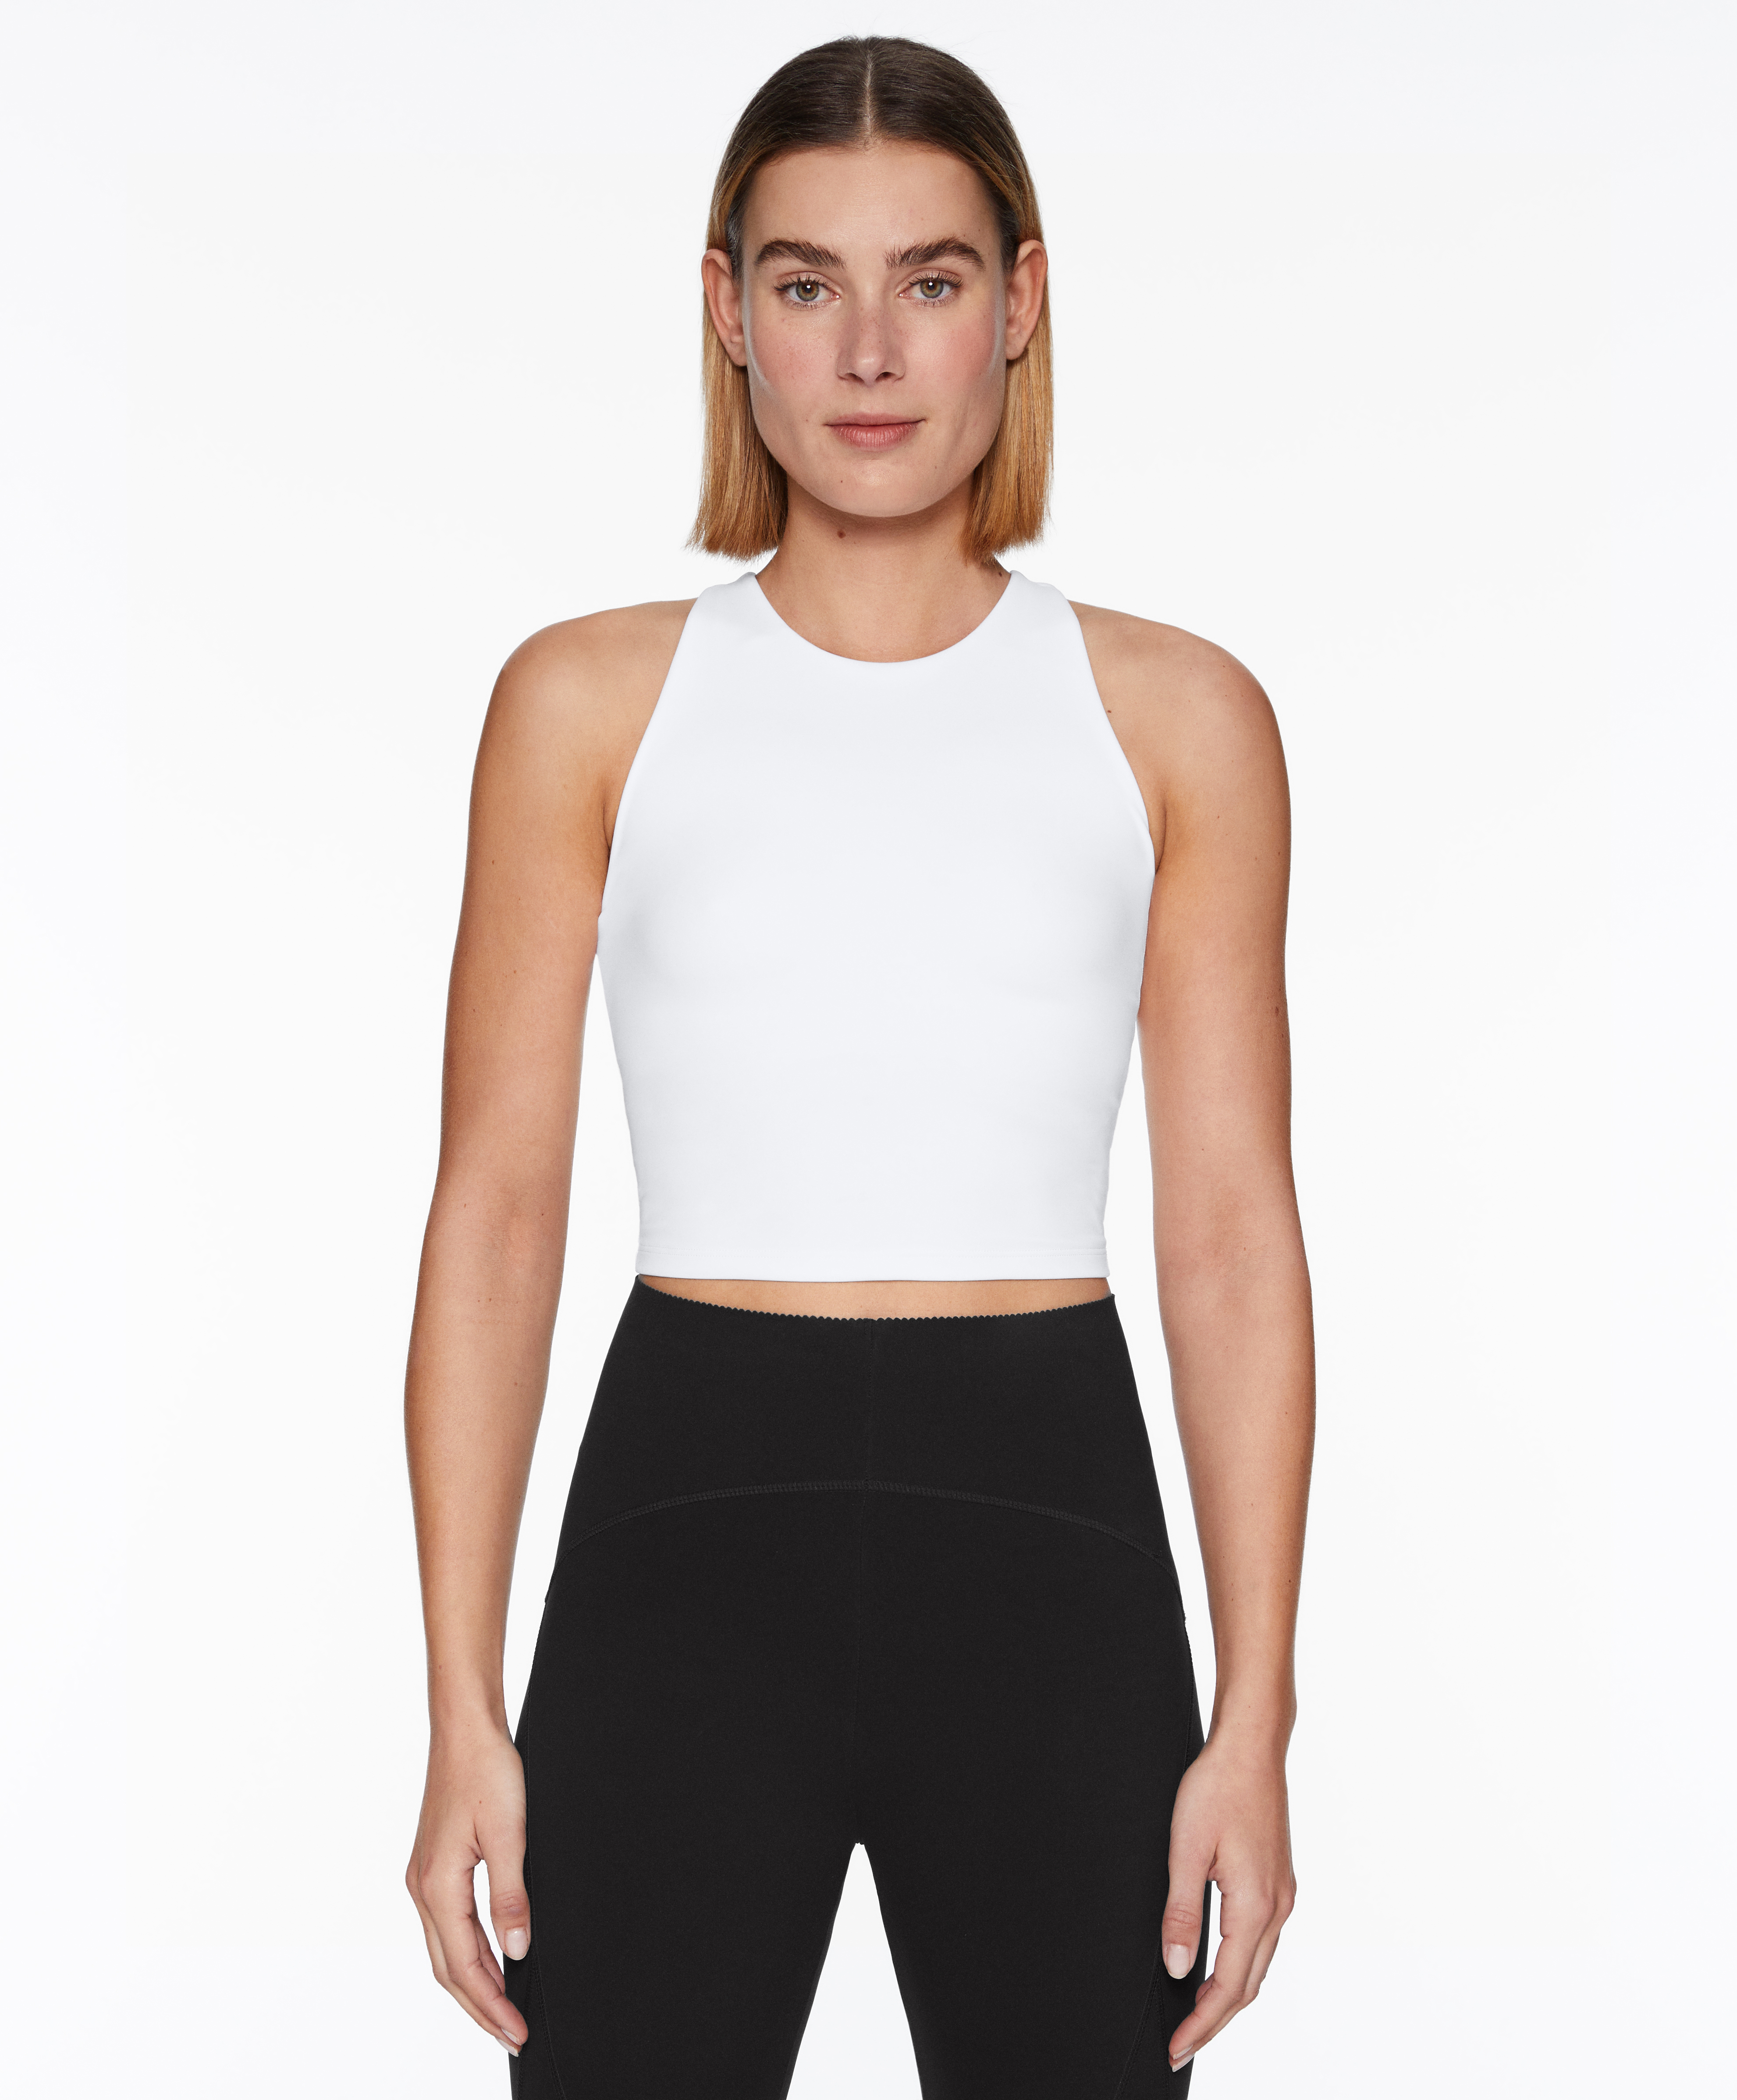 Oysho Light touch tank top with cups - 138921462-200